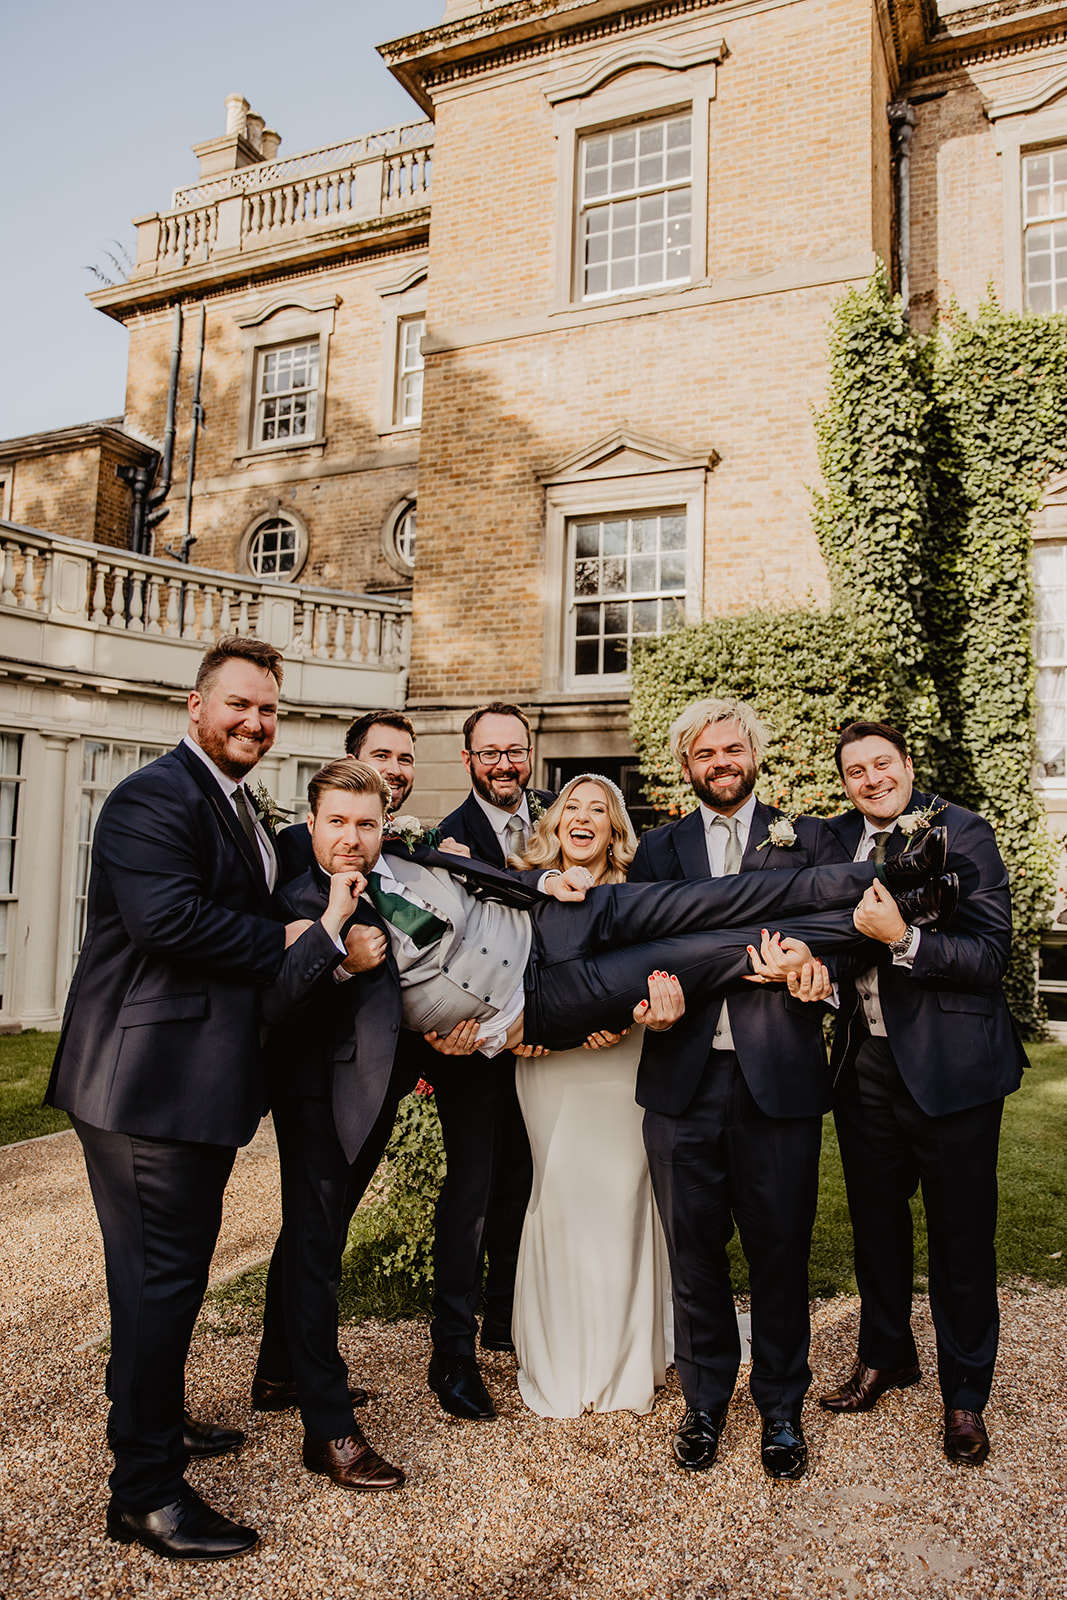 Bride, groom and wedding party at a Hampton Court House Wedding. By Olive Joy Photography